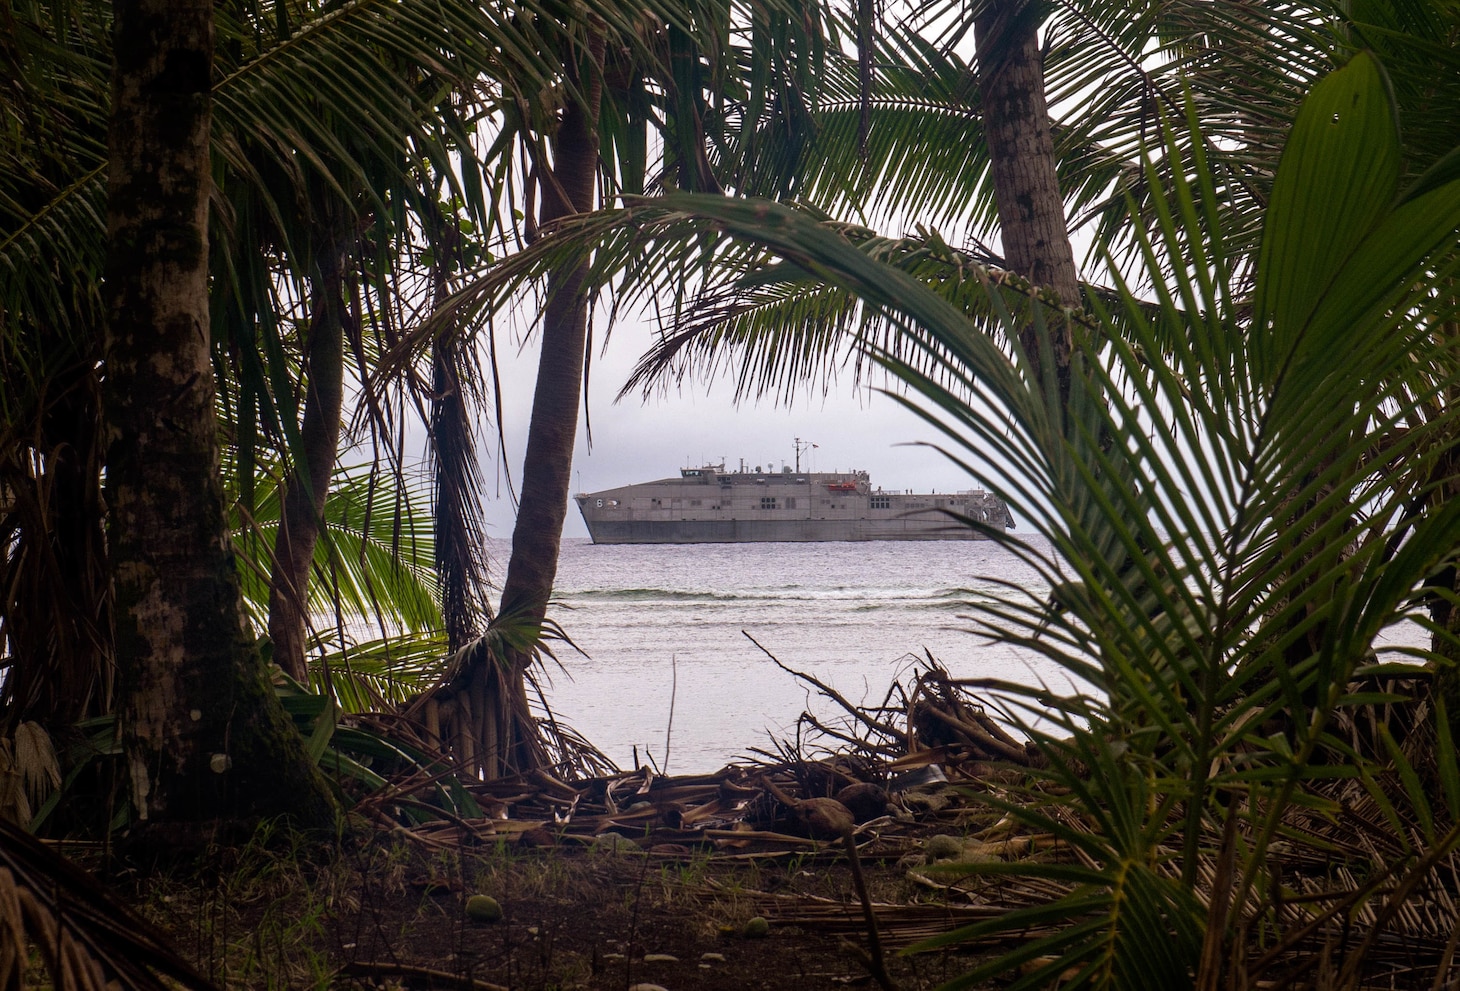 190401-N-OI558-1080 ONEOP, Federated States of Micronesia (April 1, 2019) Military Sealift Command expeditionary fast transport ship USNS Brunswick (T-EPF 6) transits the Pacific Ocean during Pacific Partnership 2019.  Pacific Partnership, now in its 14th iteration, is the largest annual multinational humanitarian assistance and disaster relief preparedness mission conducted in the Indo-Pacific. Each year, the mission team works collectively with host and partner nations to enhance regional interoperability and disaster response capabilities, increase stability and security in the region, and foster new and enduring friendships in the Indo-Pacific.